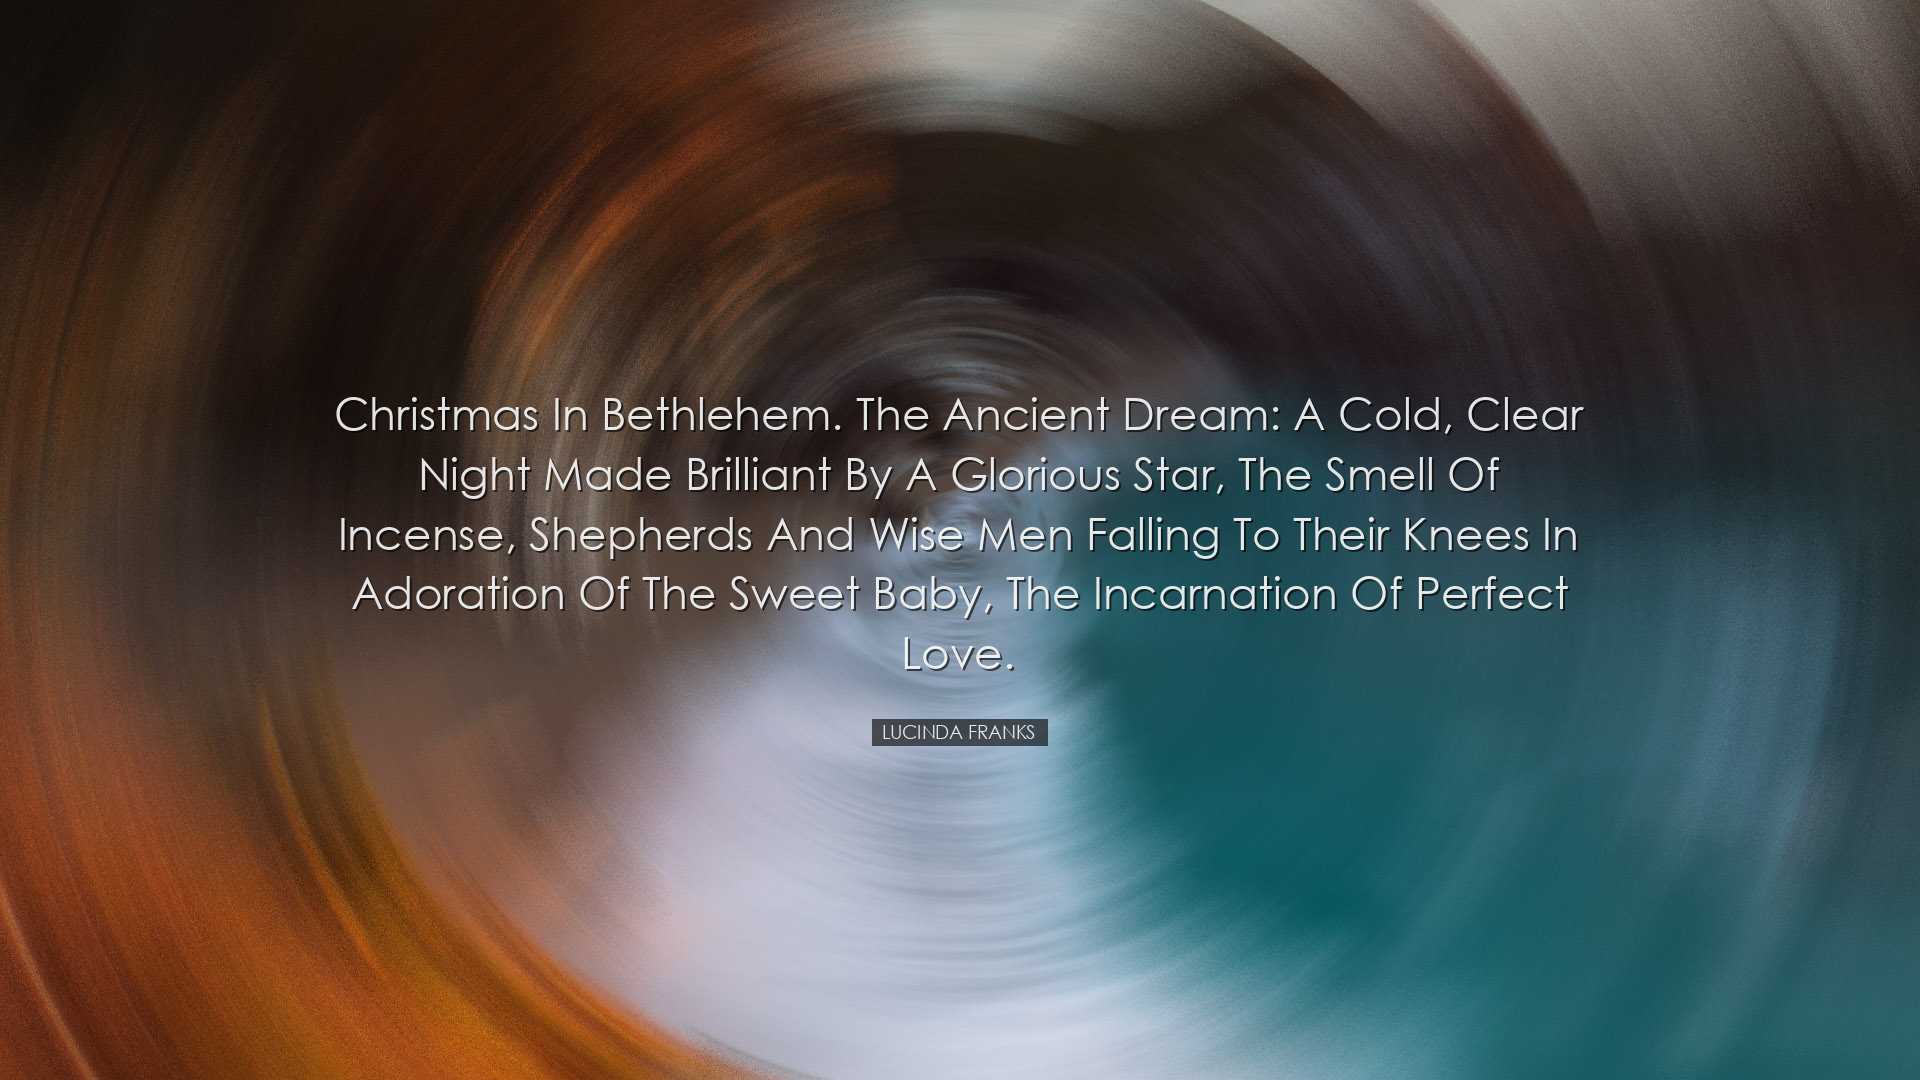 Christmas in Bethlehem. The ancient dream: a cold, clear night mad